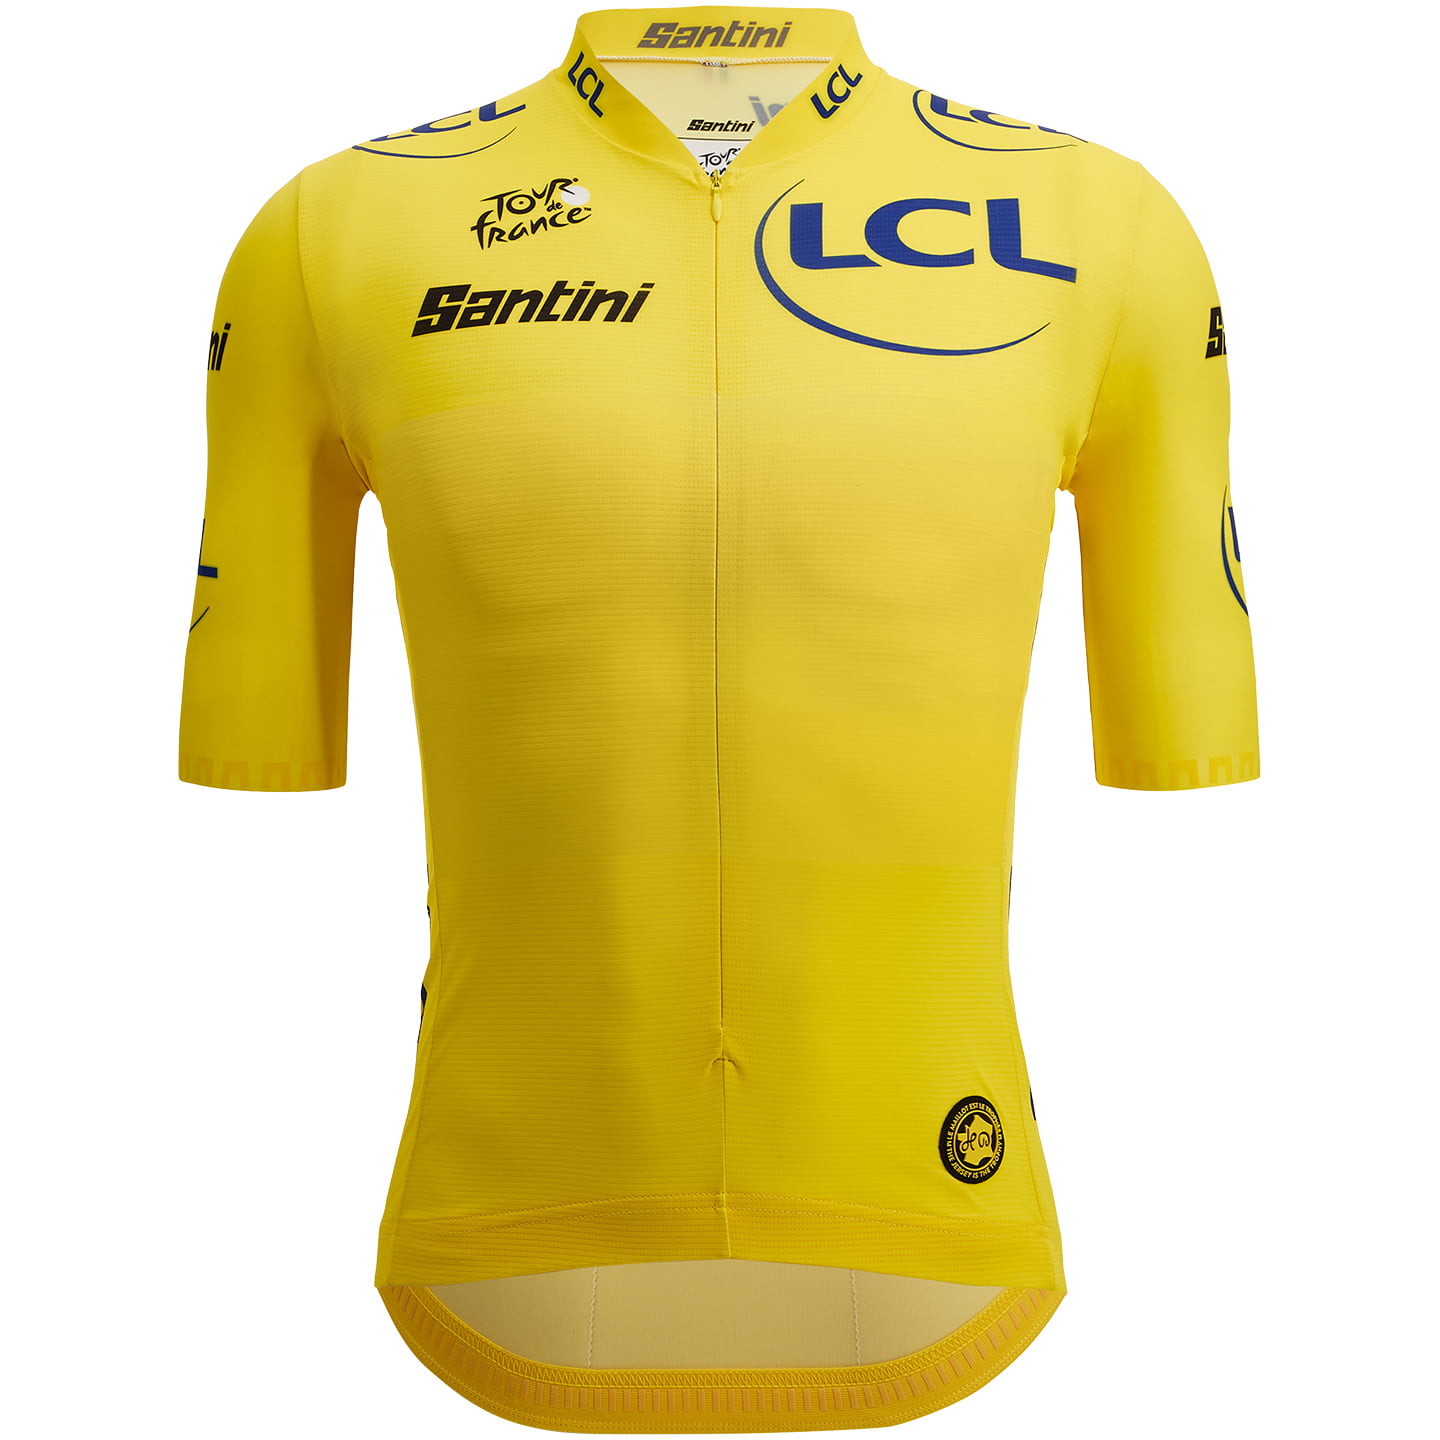 TOUR DE FRANCE Race Yellow Jersey 2022 Short Sleeve Jersey, for men, size S, Cycling jersey, Cycling clothing